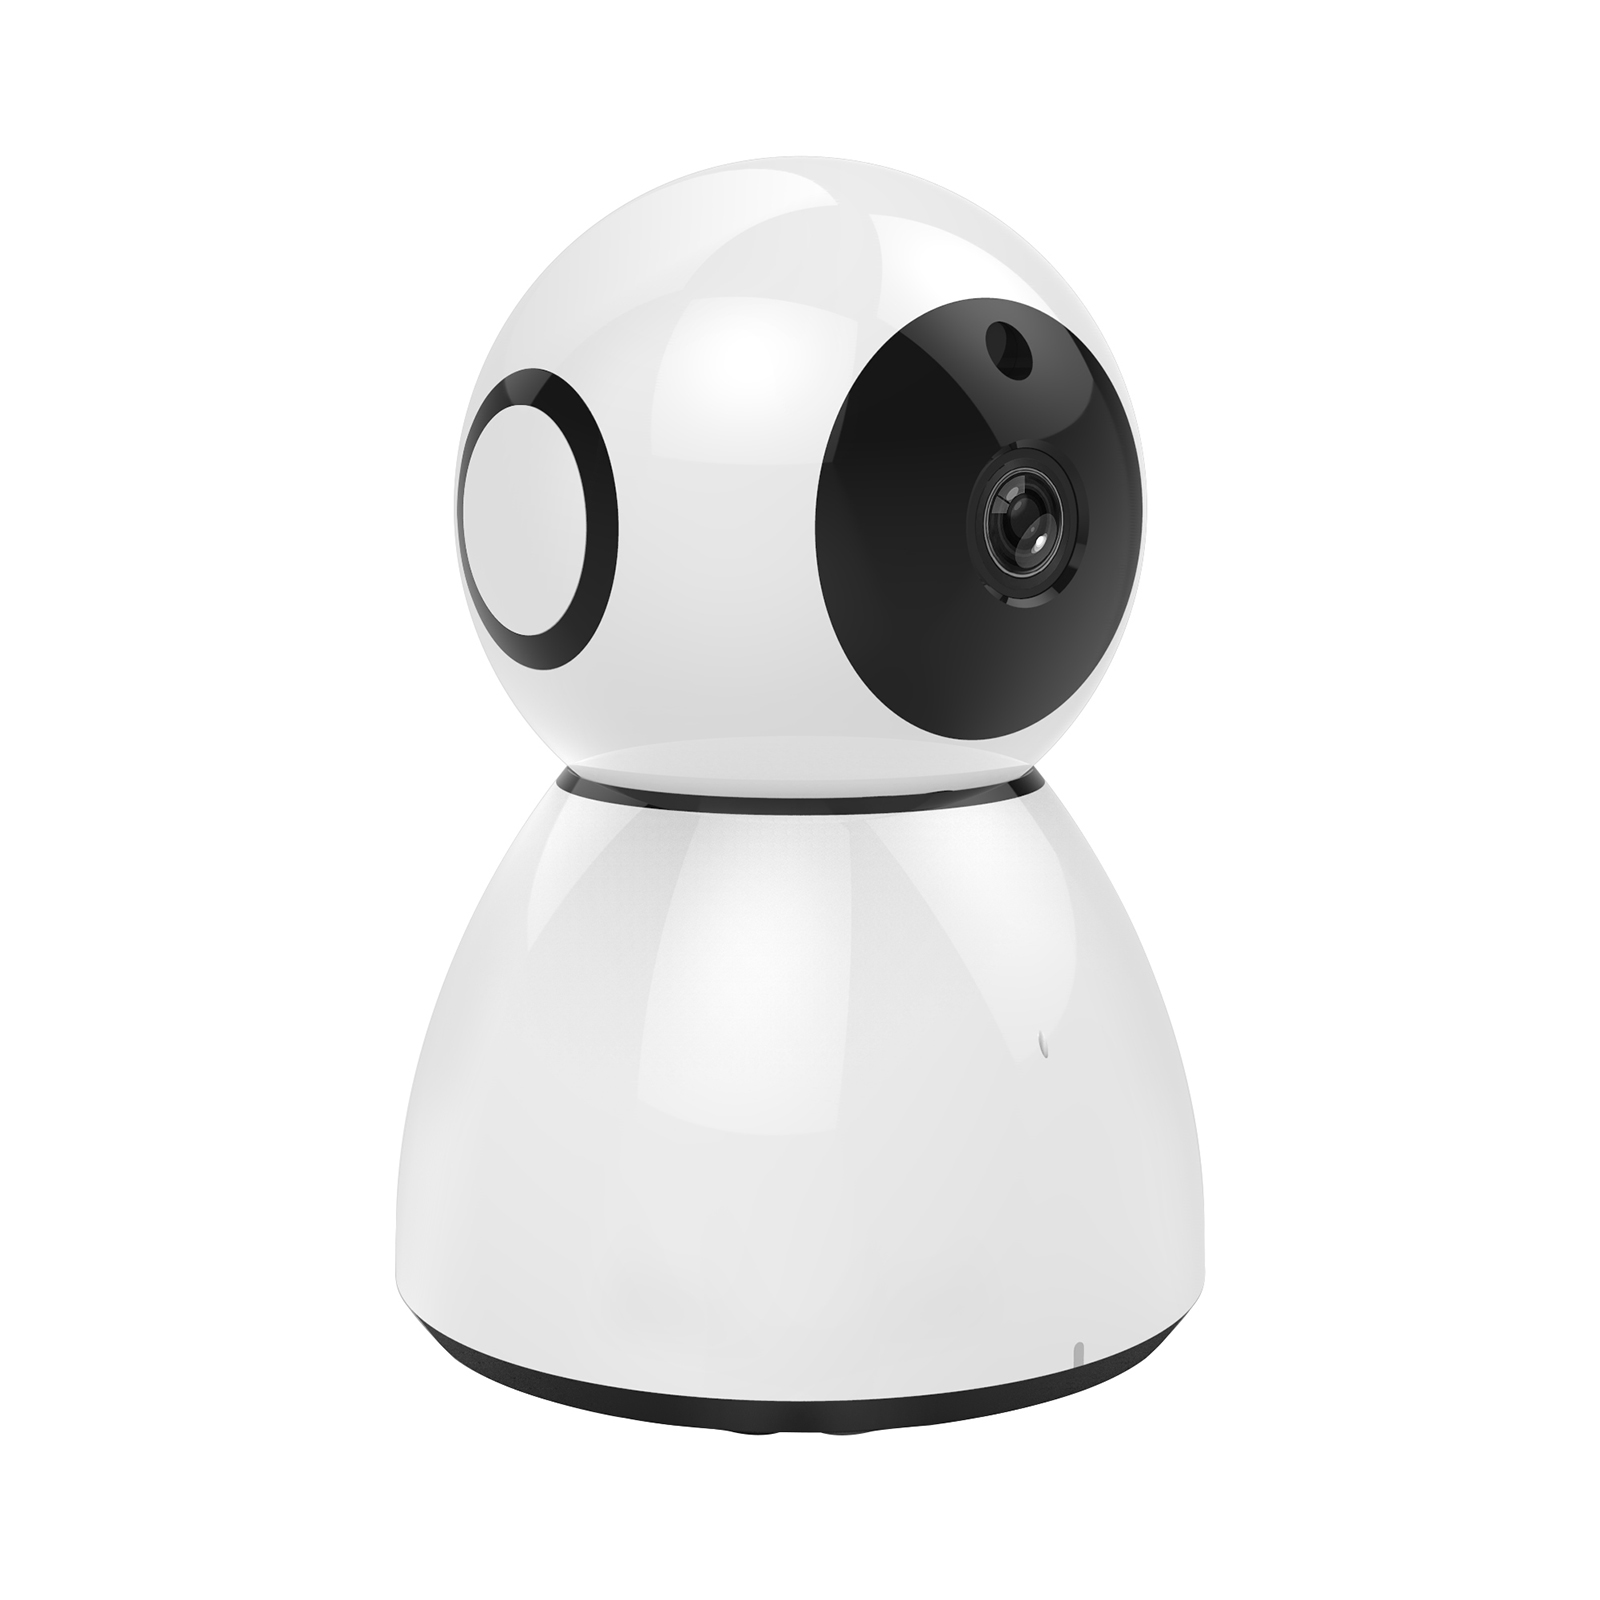 Find Wireless IP Camera SAWAKE 1080P HD WiFi Cam Night Vision Home Security Camera with Alexa CCTV Monitor Security Surveillance 200W Two-Way Audio Motion Detection for Sale on Gipsybee.com with cryptocurrencies